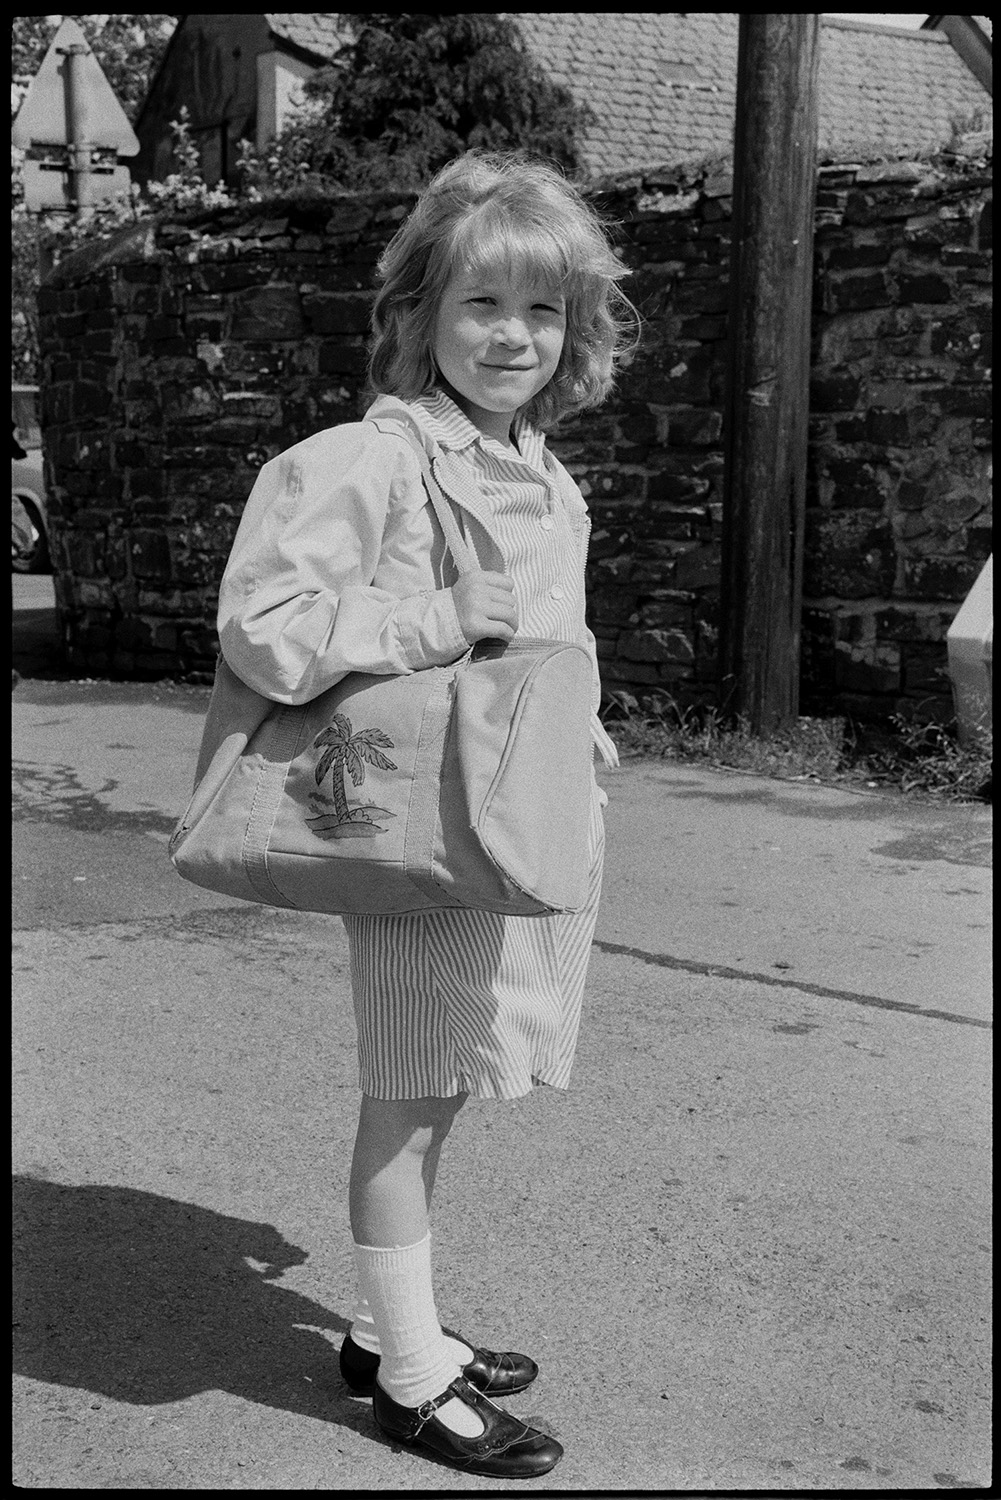 Schoolchildren after school, girls.<br />
[Nicky Squire leaving Dolton Primary School, carrying a holdall bag.]